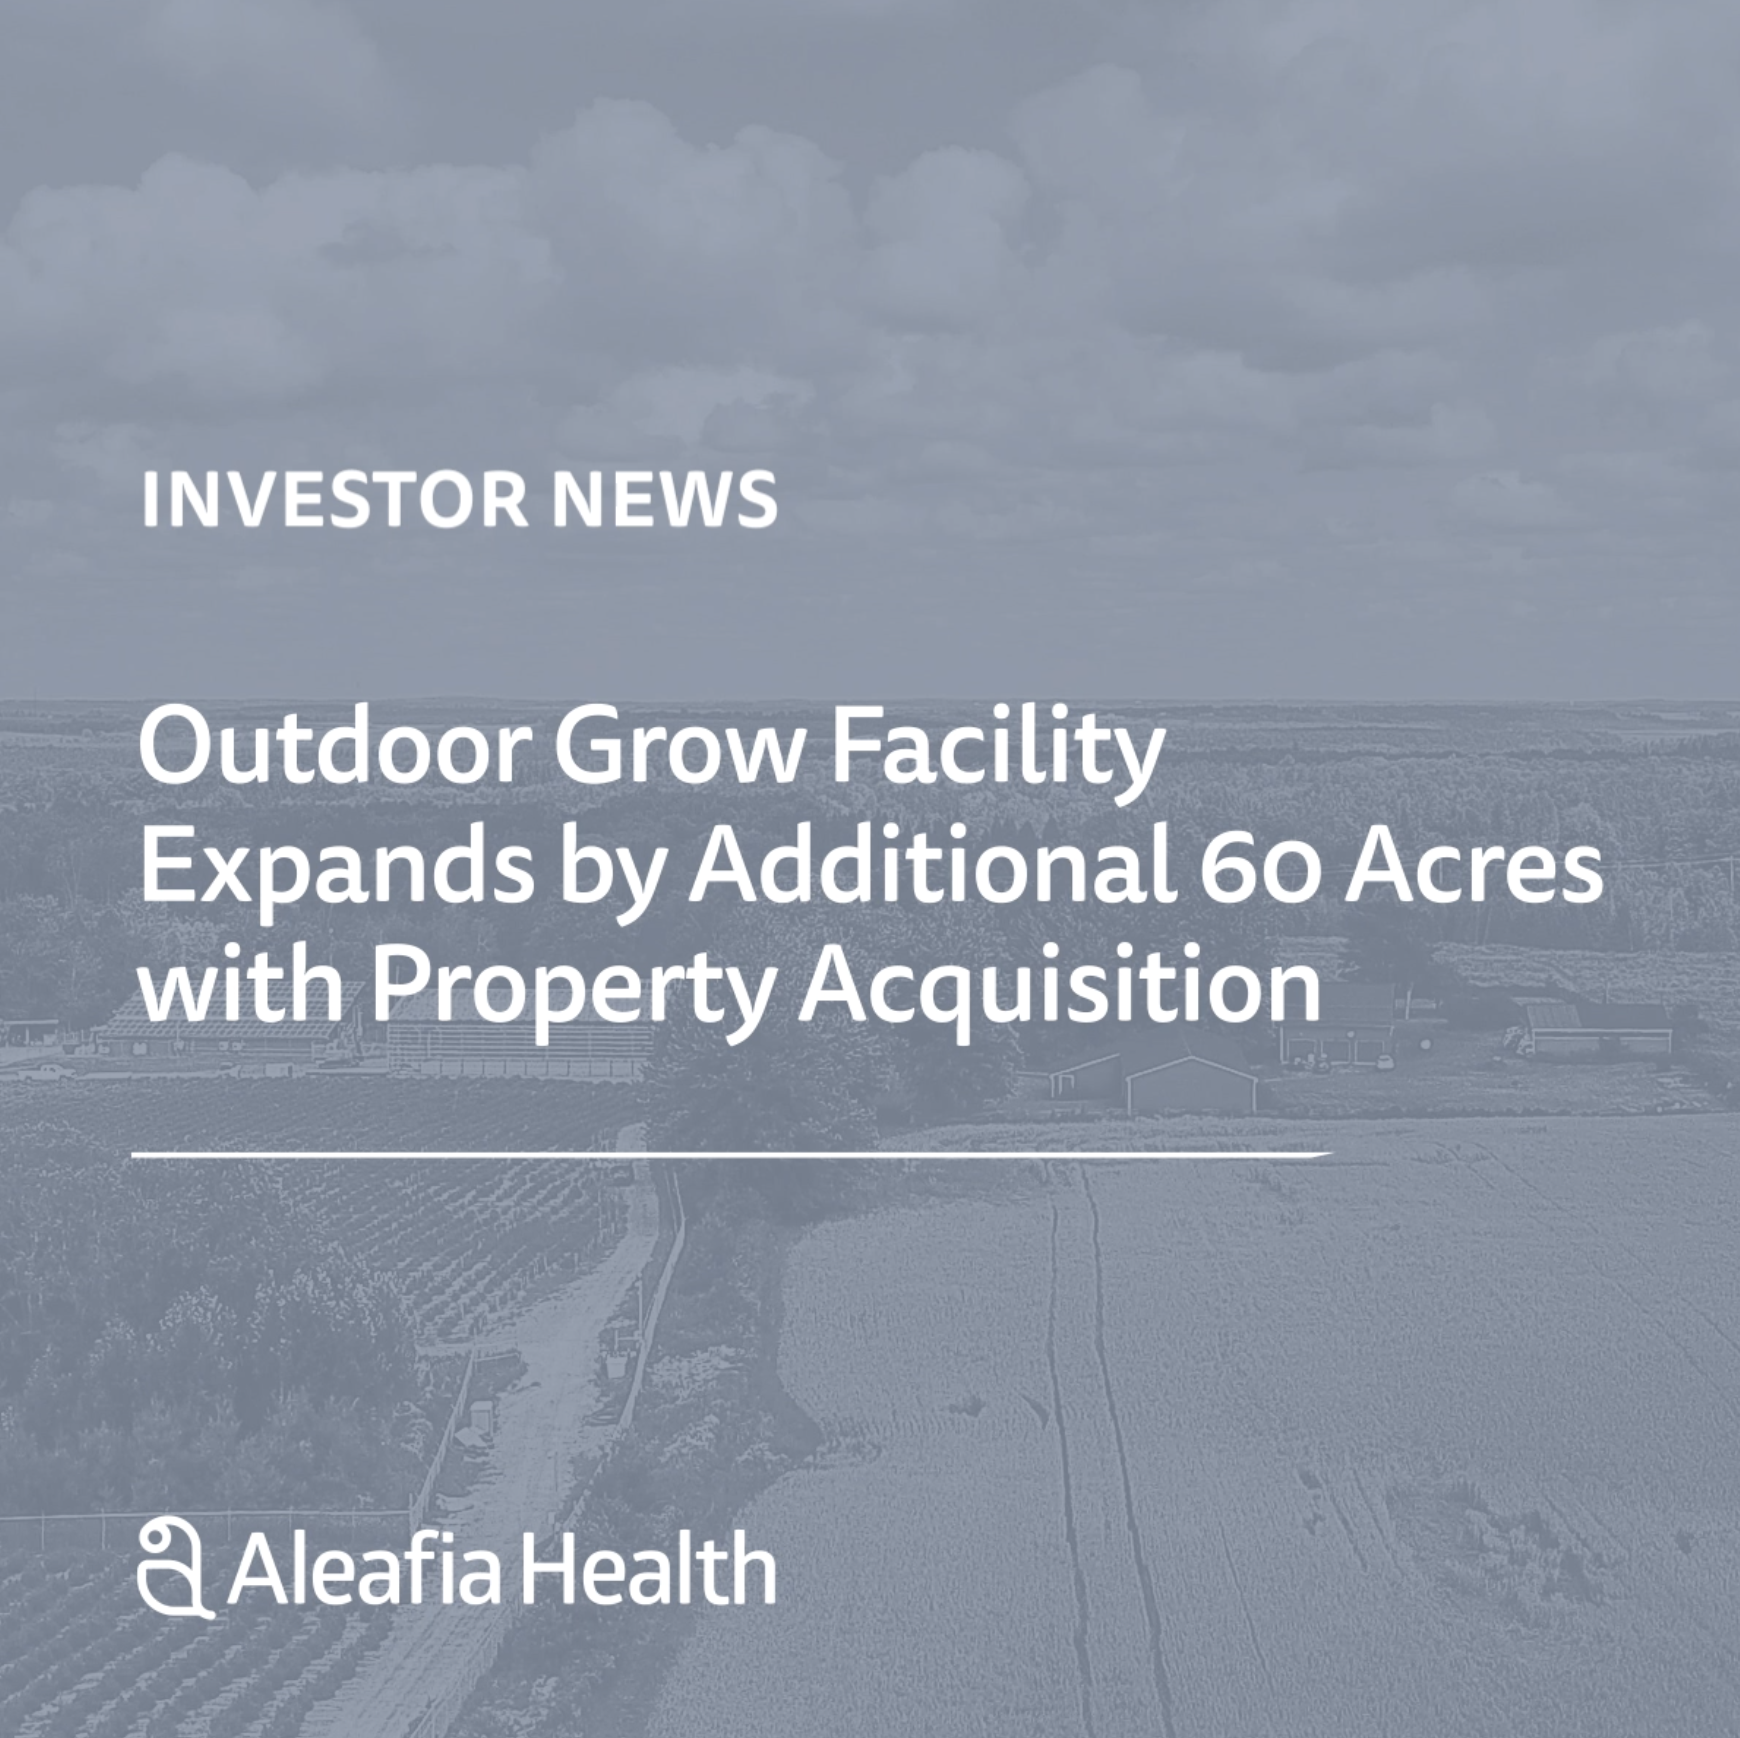 Aleafia Health Expands Outdoor Cannabis Facility by Additional 60 Acres with Property Acquisition